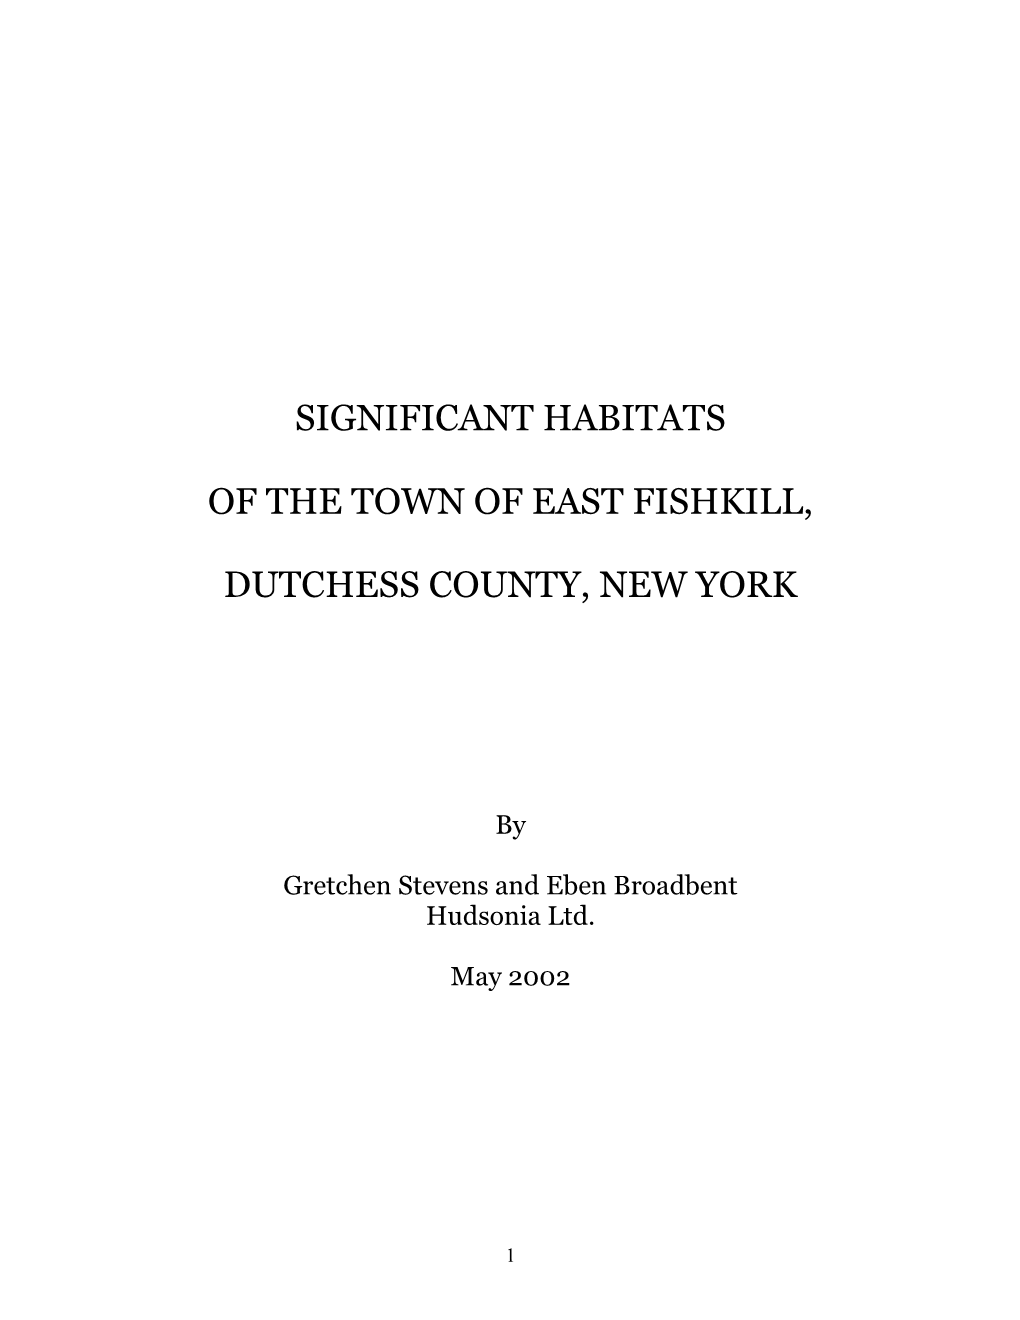 Significant Habitats of the Town of East Fishkill, Dutchess County, New York